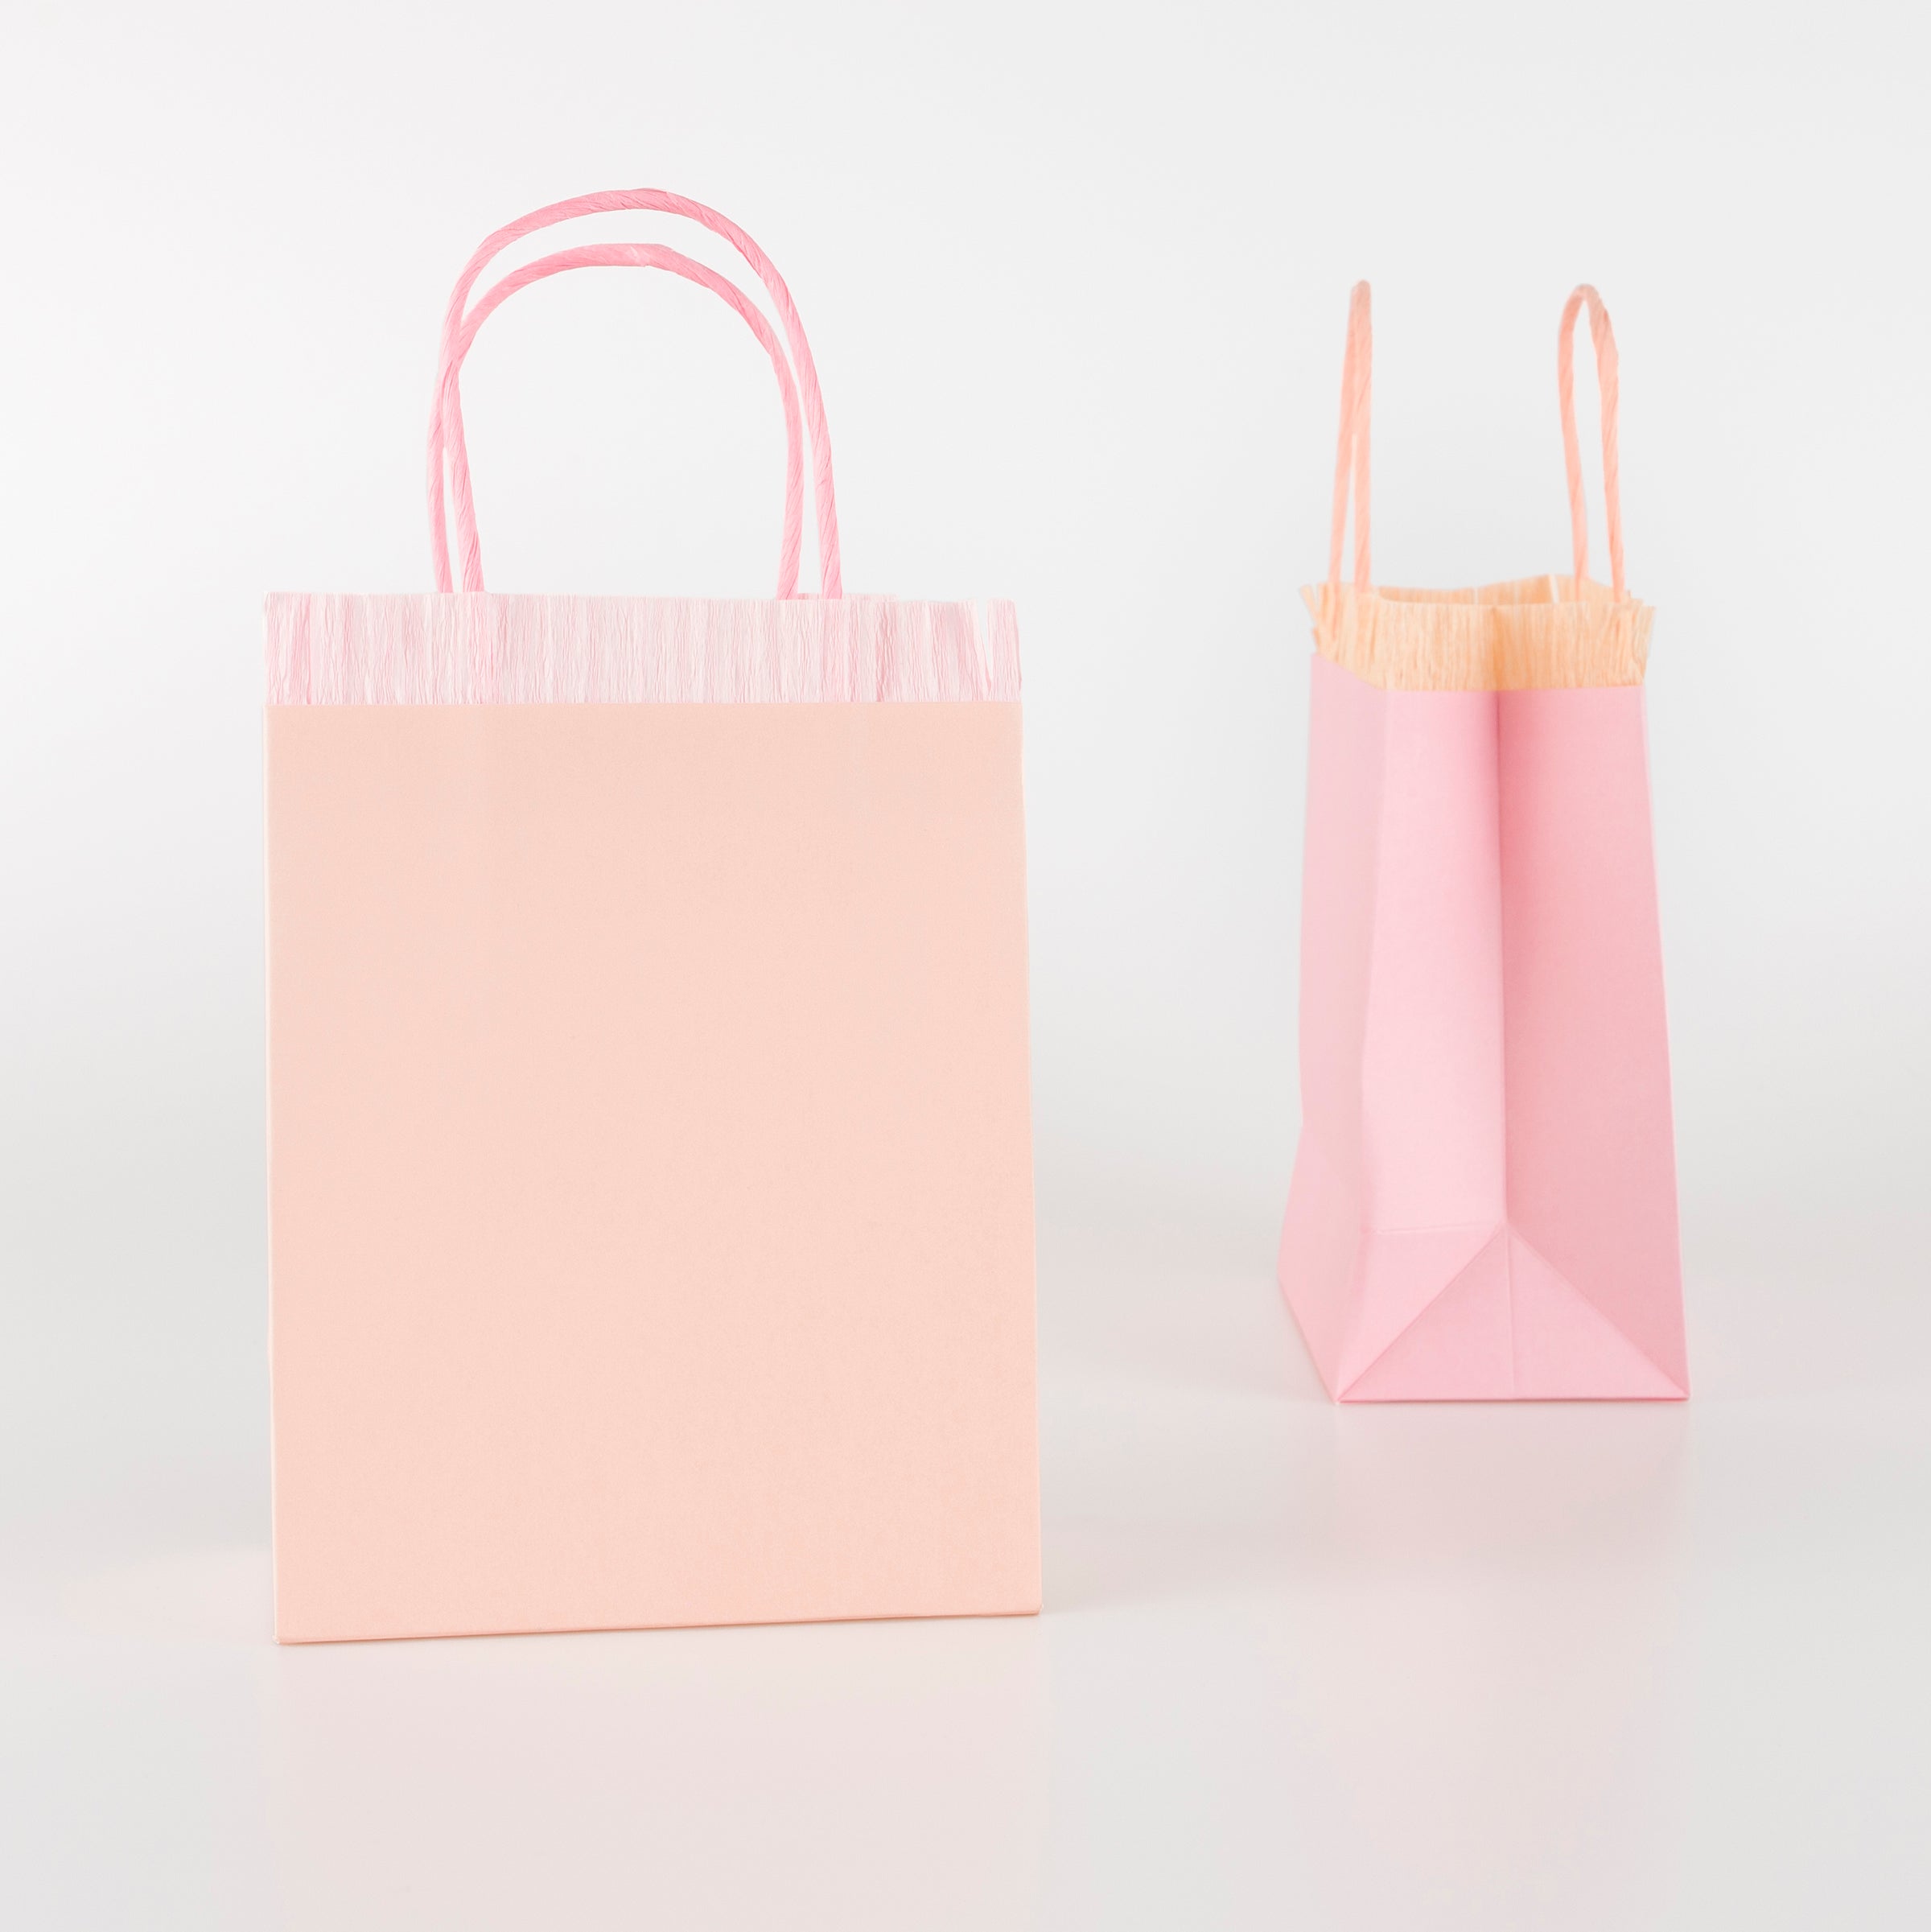 Our pink fringed bags are perfect as paper gift bags and party gift bags.